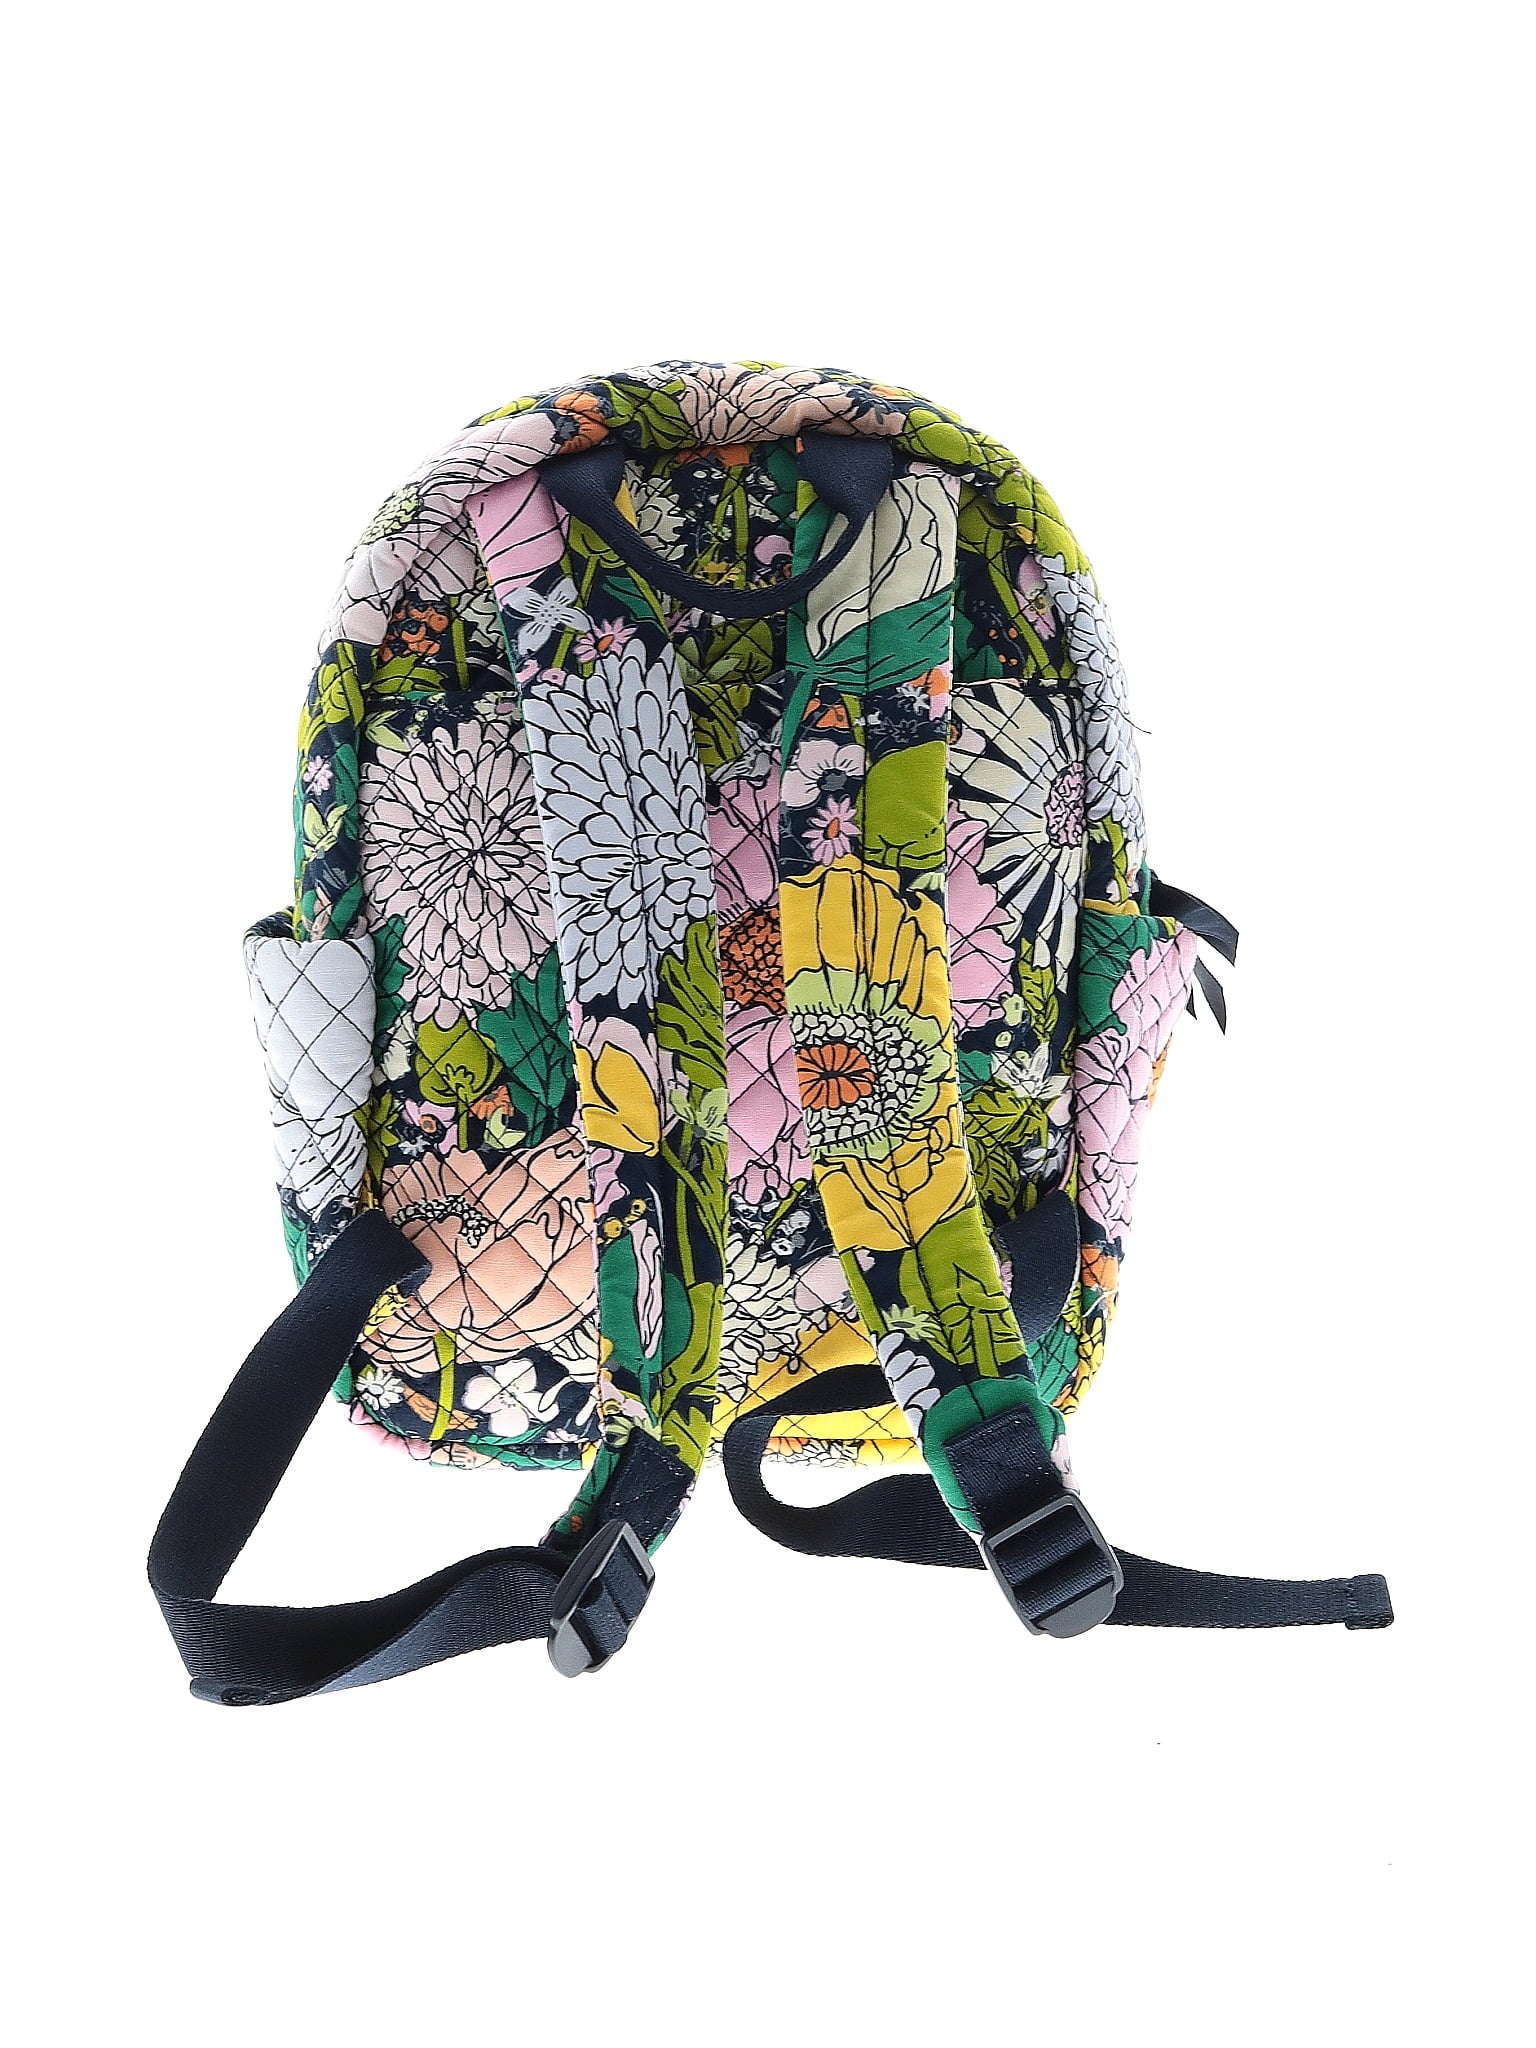 Bloom Boom Small Backpack size - One Size